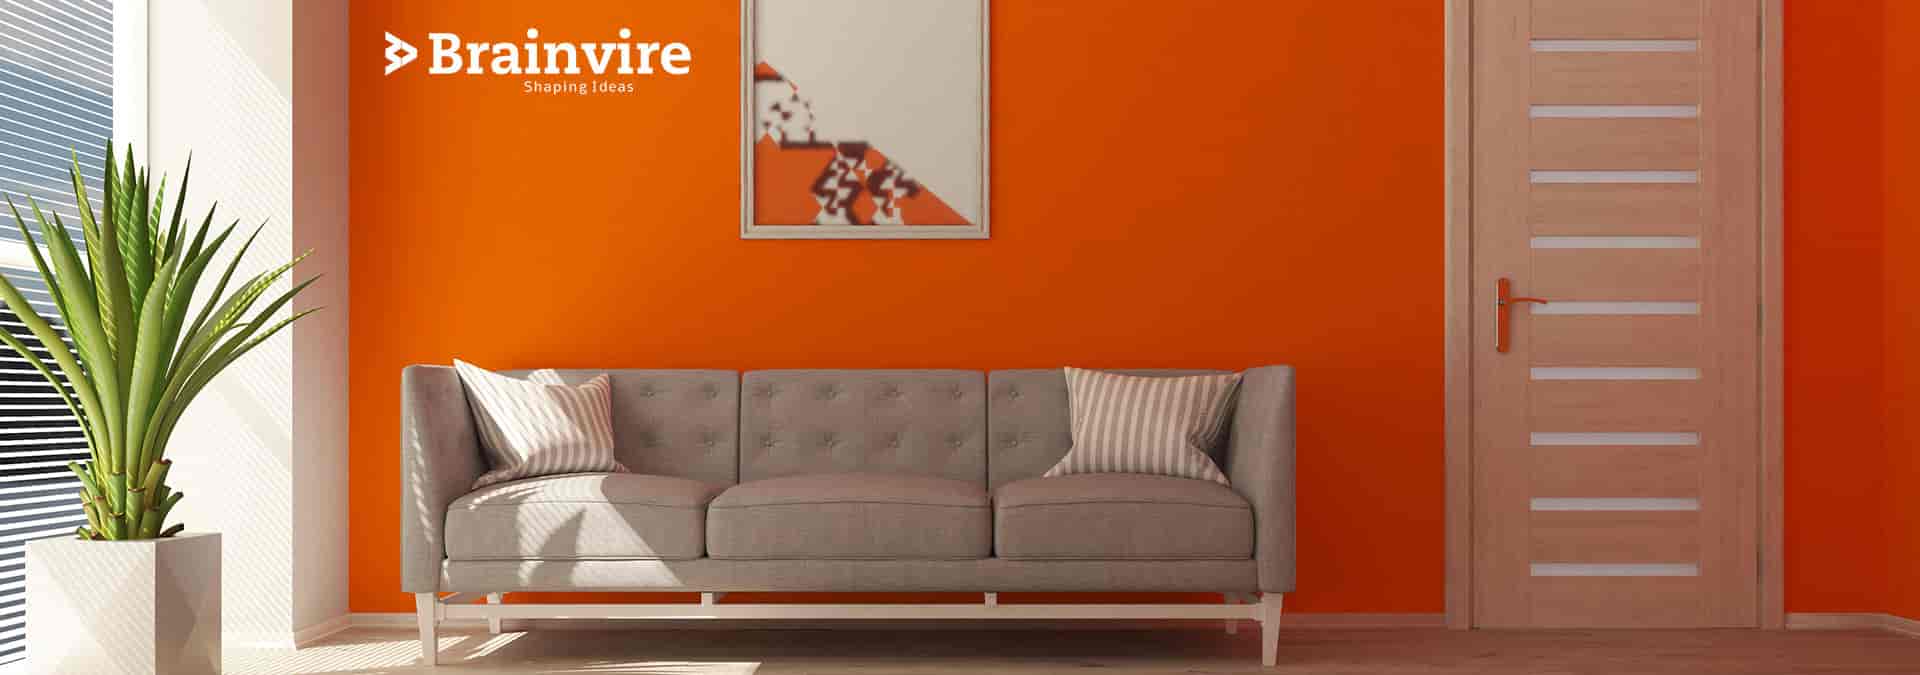 Brainvire implemented ERP solution for a leading UK-based Home Decor Brand